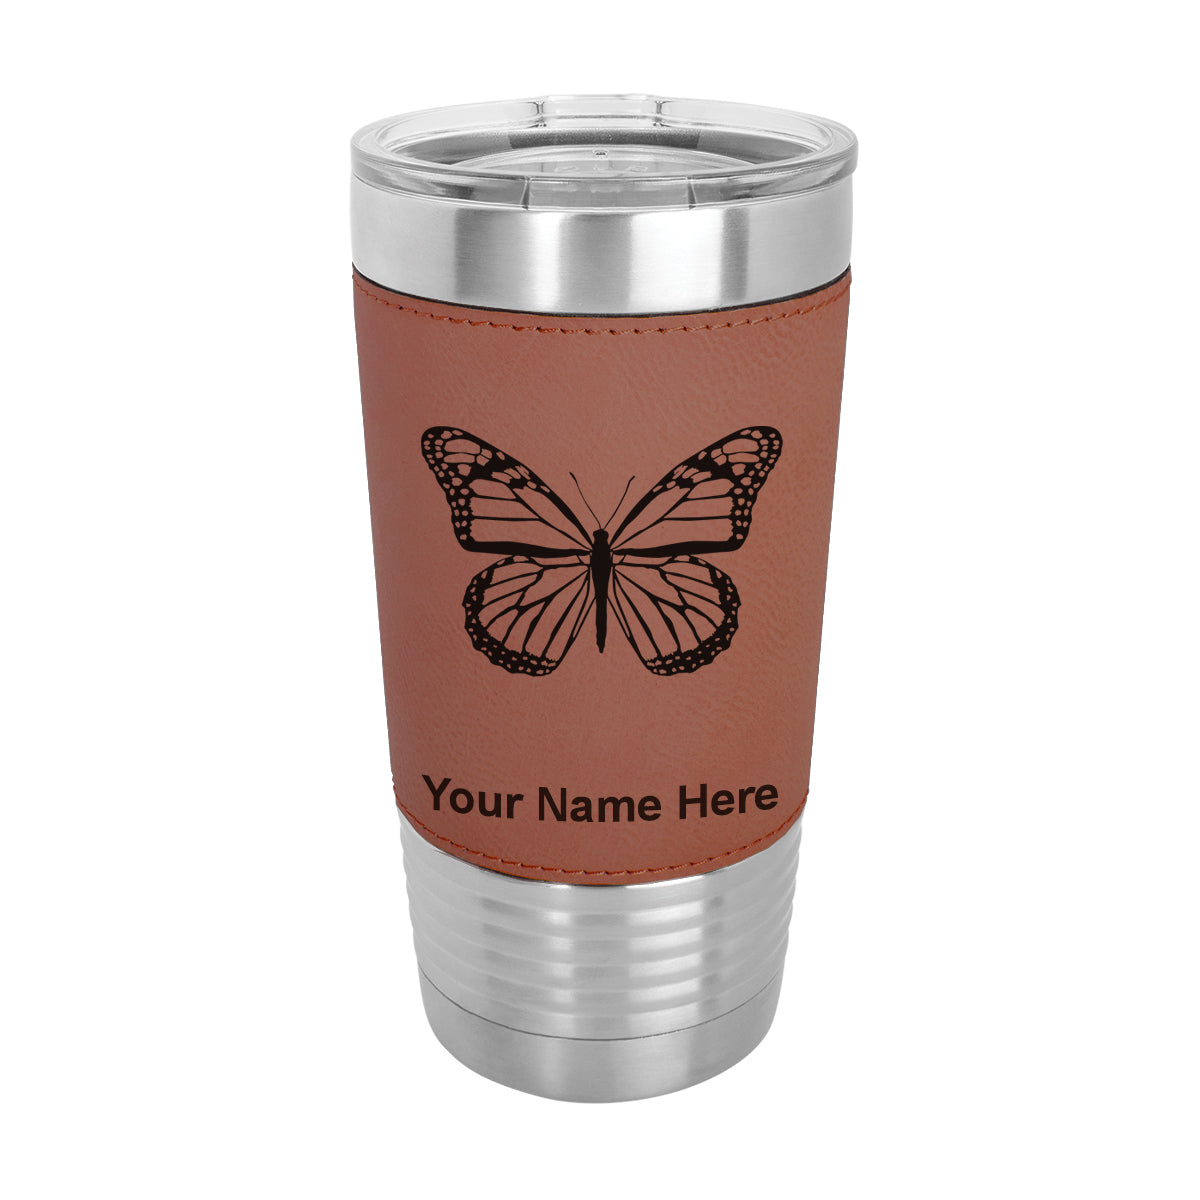 20oz Faux Leather Tumbler Mug, Monarch Butterfly, Personalized Engraving Included - LaserGram Custom Engraved Gifts